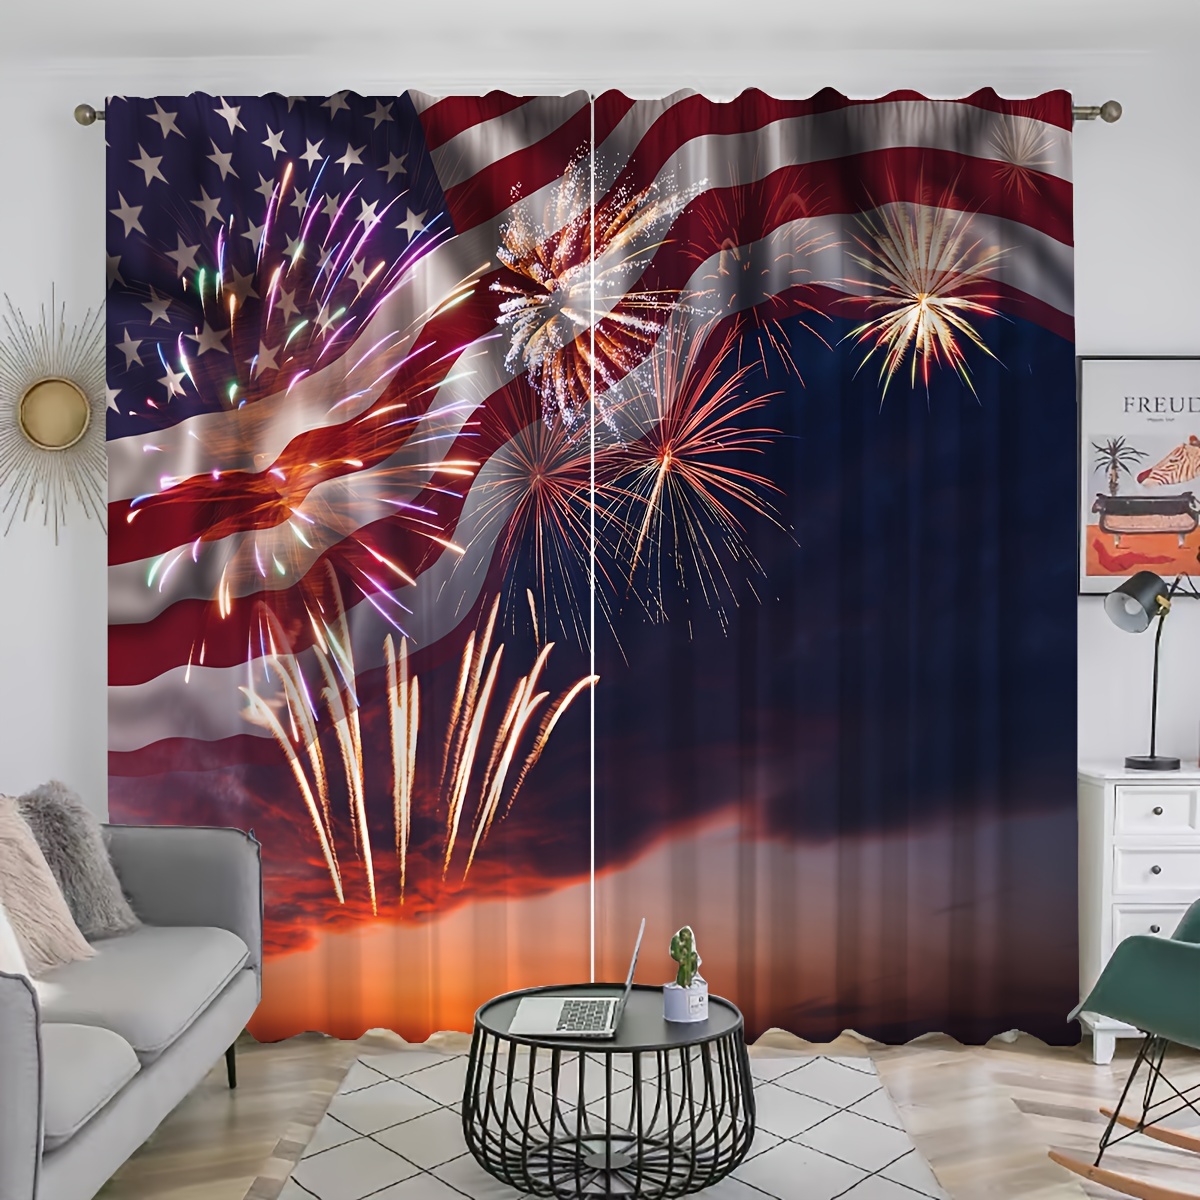 

2pcs, American Independence Day Fireworks Curtains, Rod Pocket Curtain, Suitable For Restaurants, Public Places, Living Rooms, Bedrooms, Offices, Study Rooms, Home Decoration